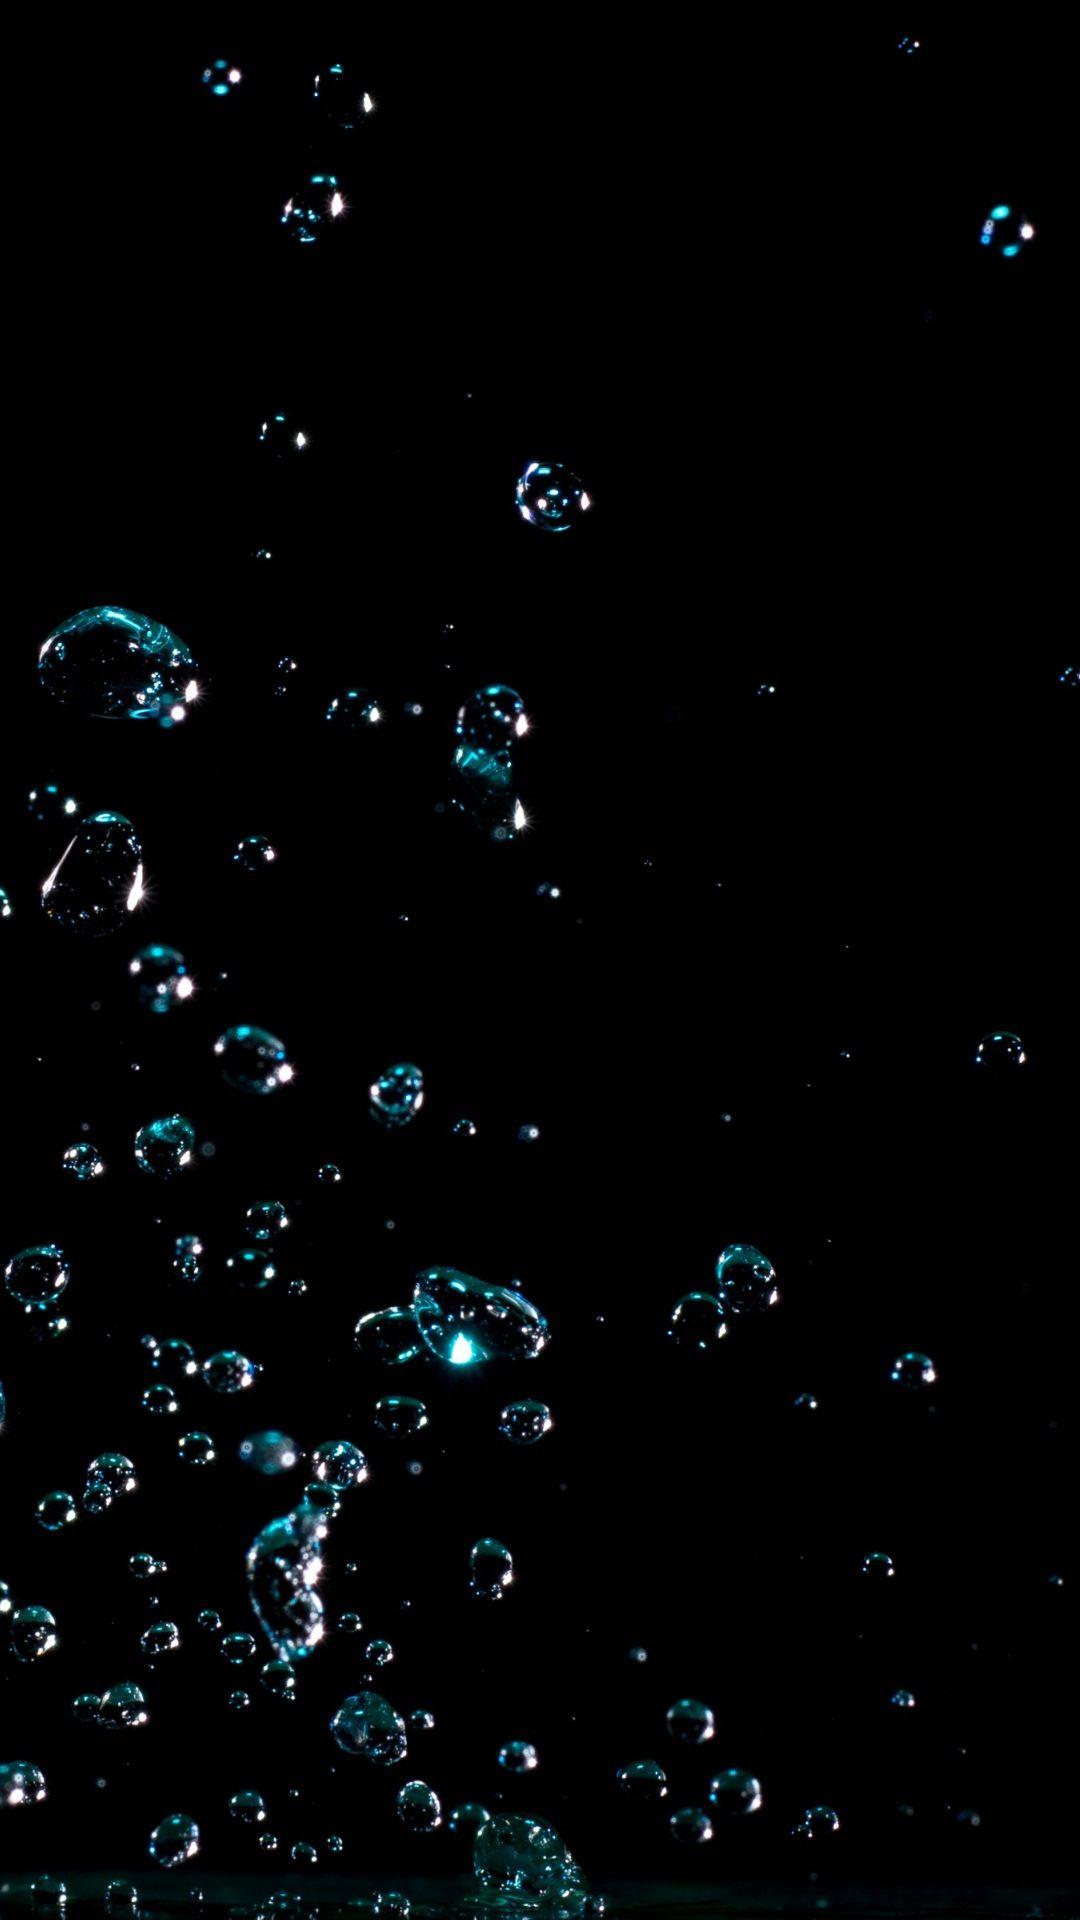 Water drops Wallpaper for iPhone 11 Pro Max X 8 7 6  Free Download on  3Wallpapers